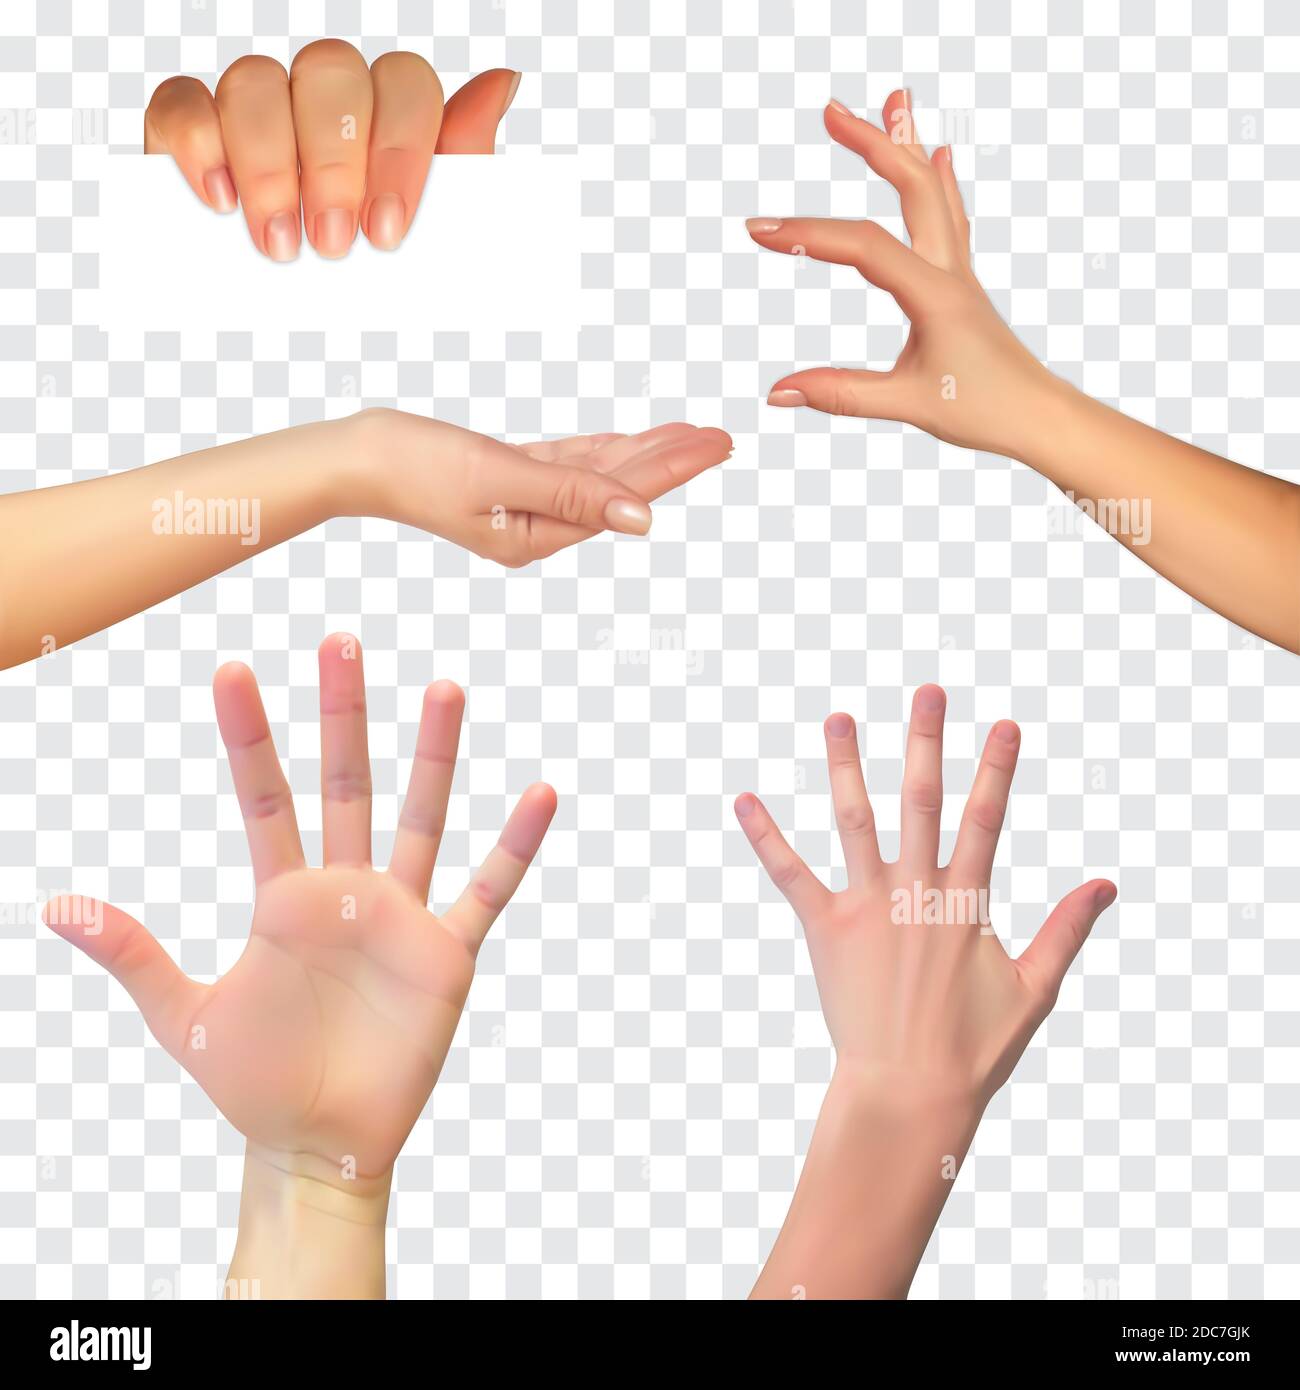 Realistic 3D Silhouette of hand on White Background. Illustration. Stock Photo